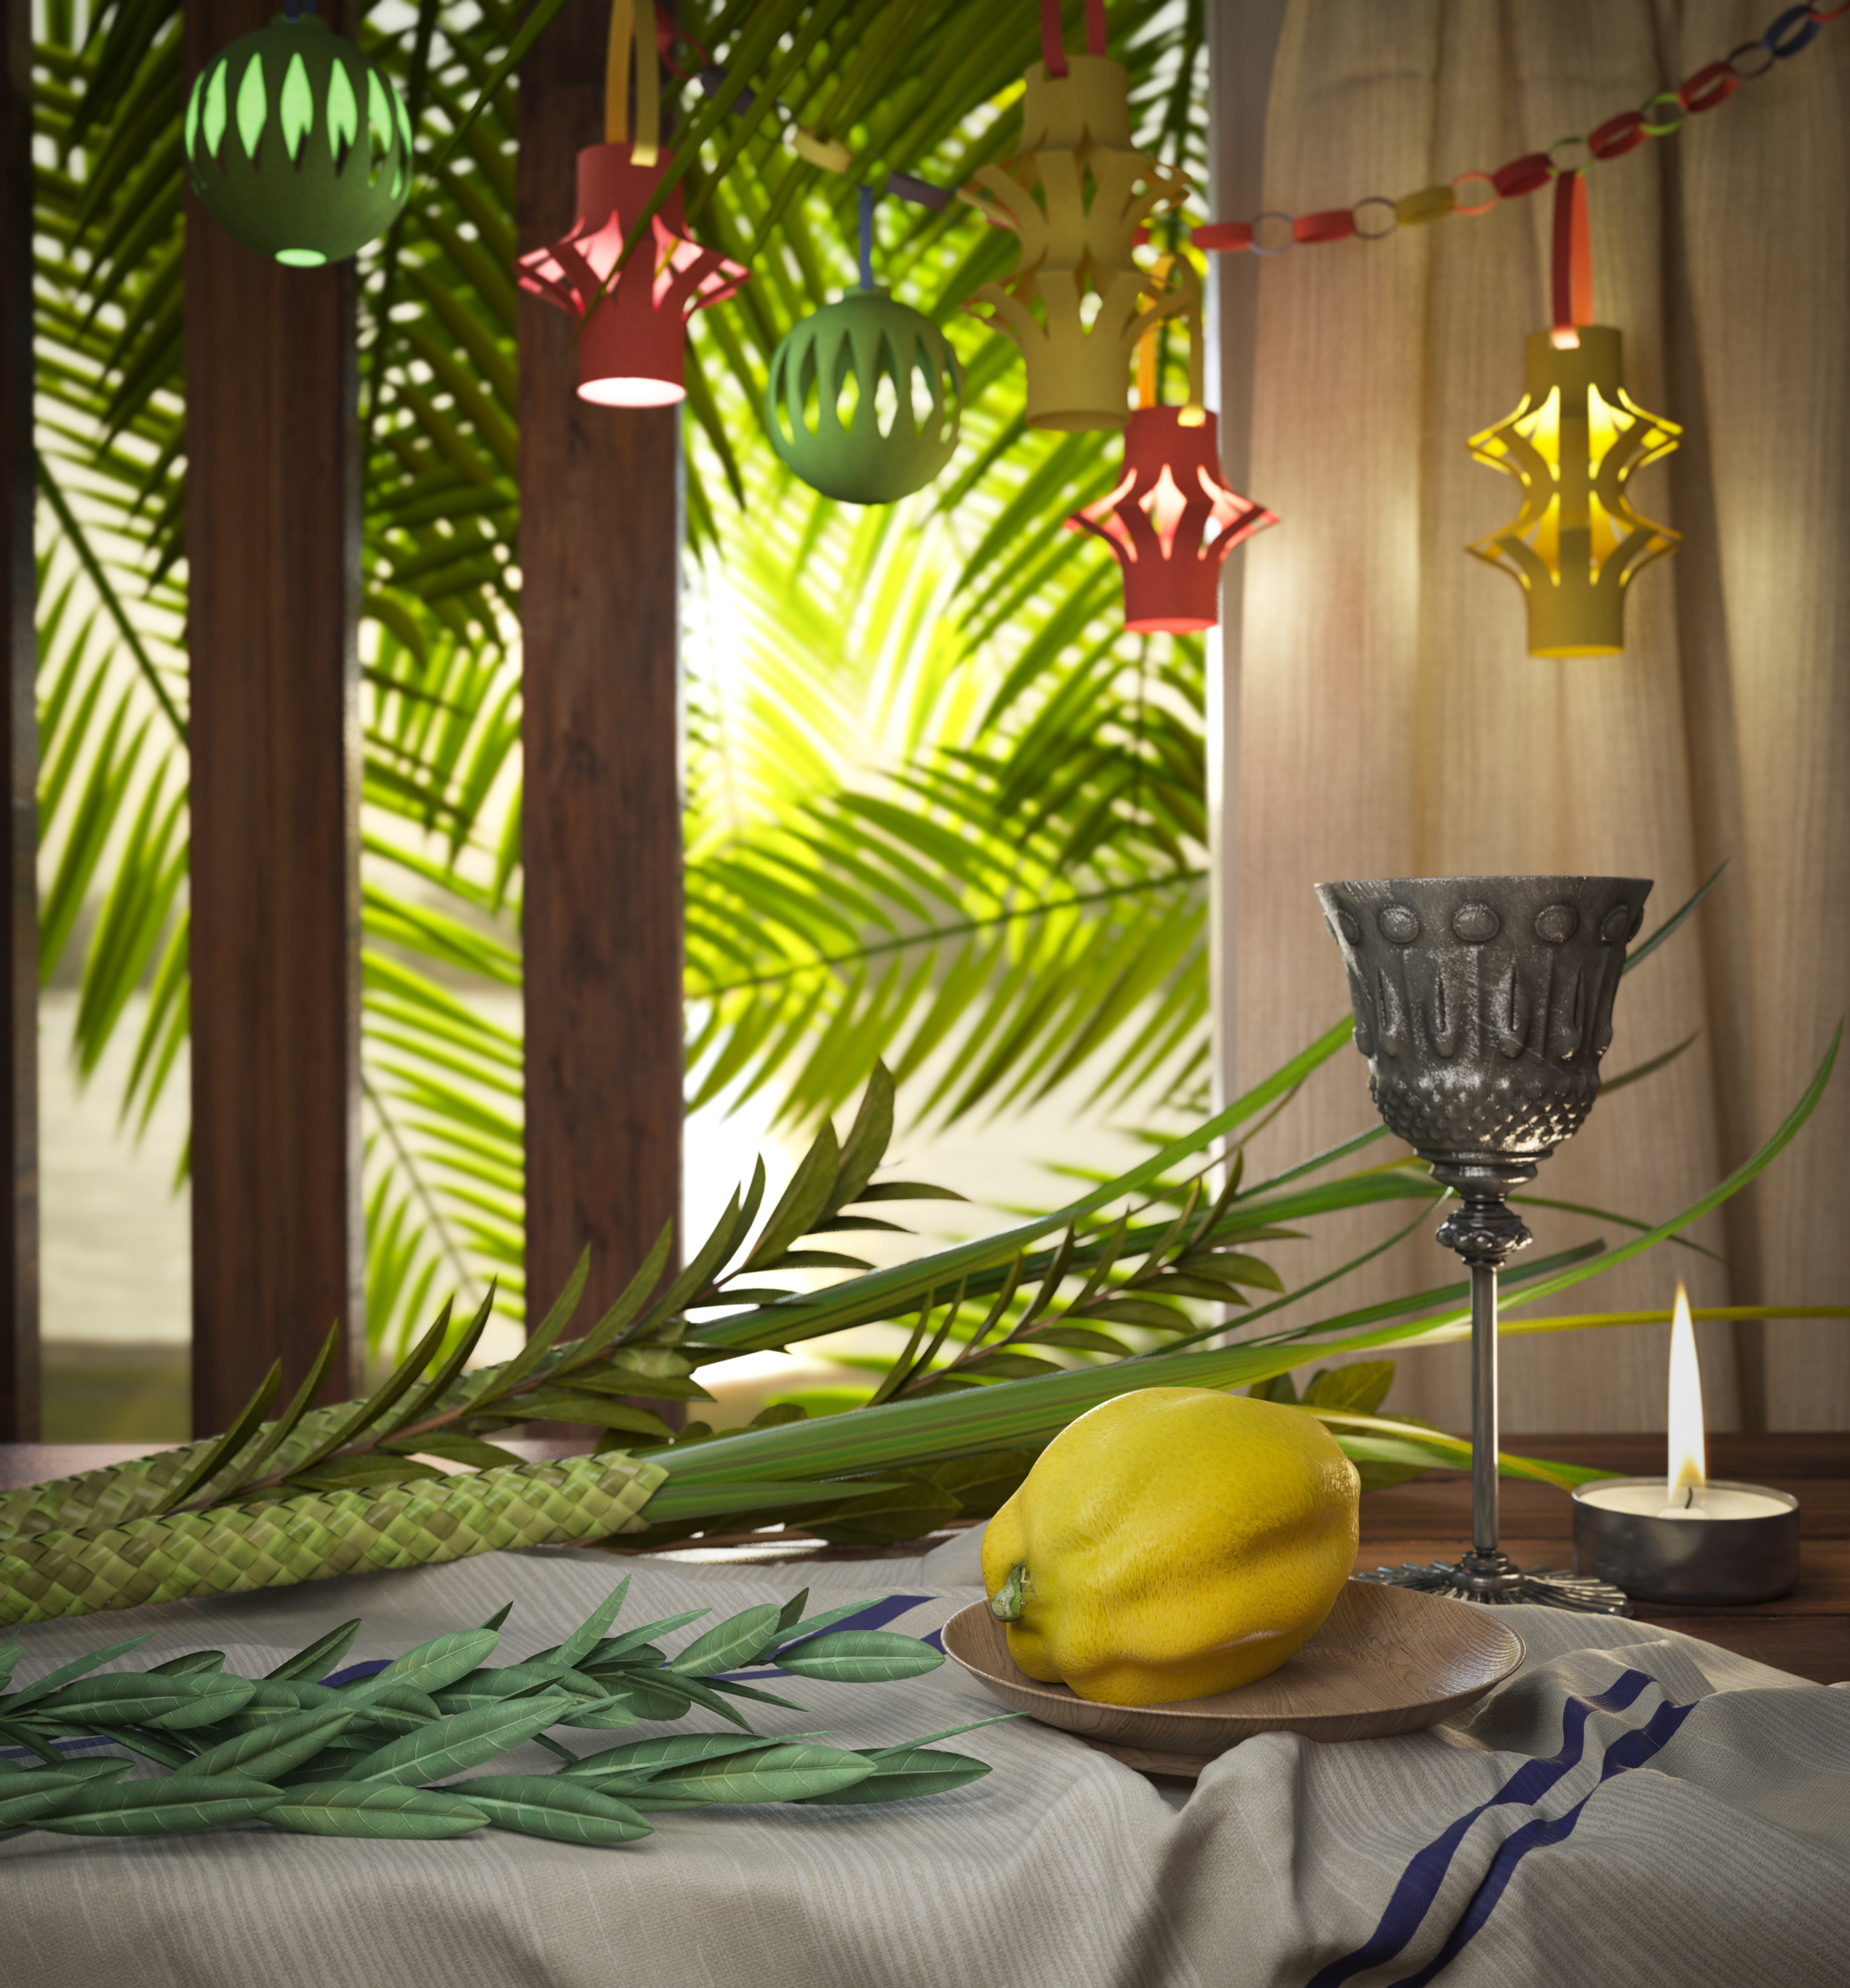 Symbols of the Jewish holiday, Feast of Sukkot with palm leaves and candle.